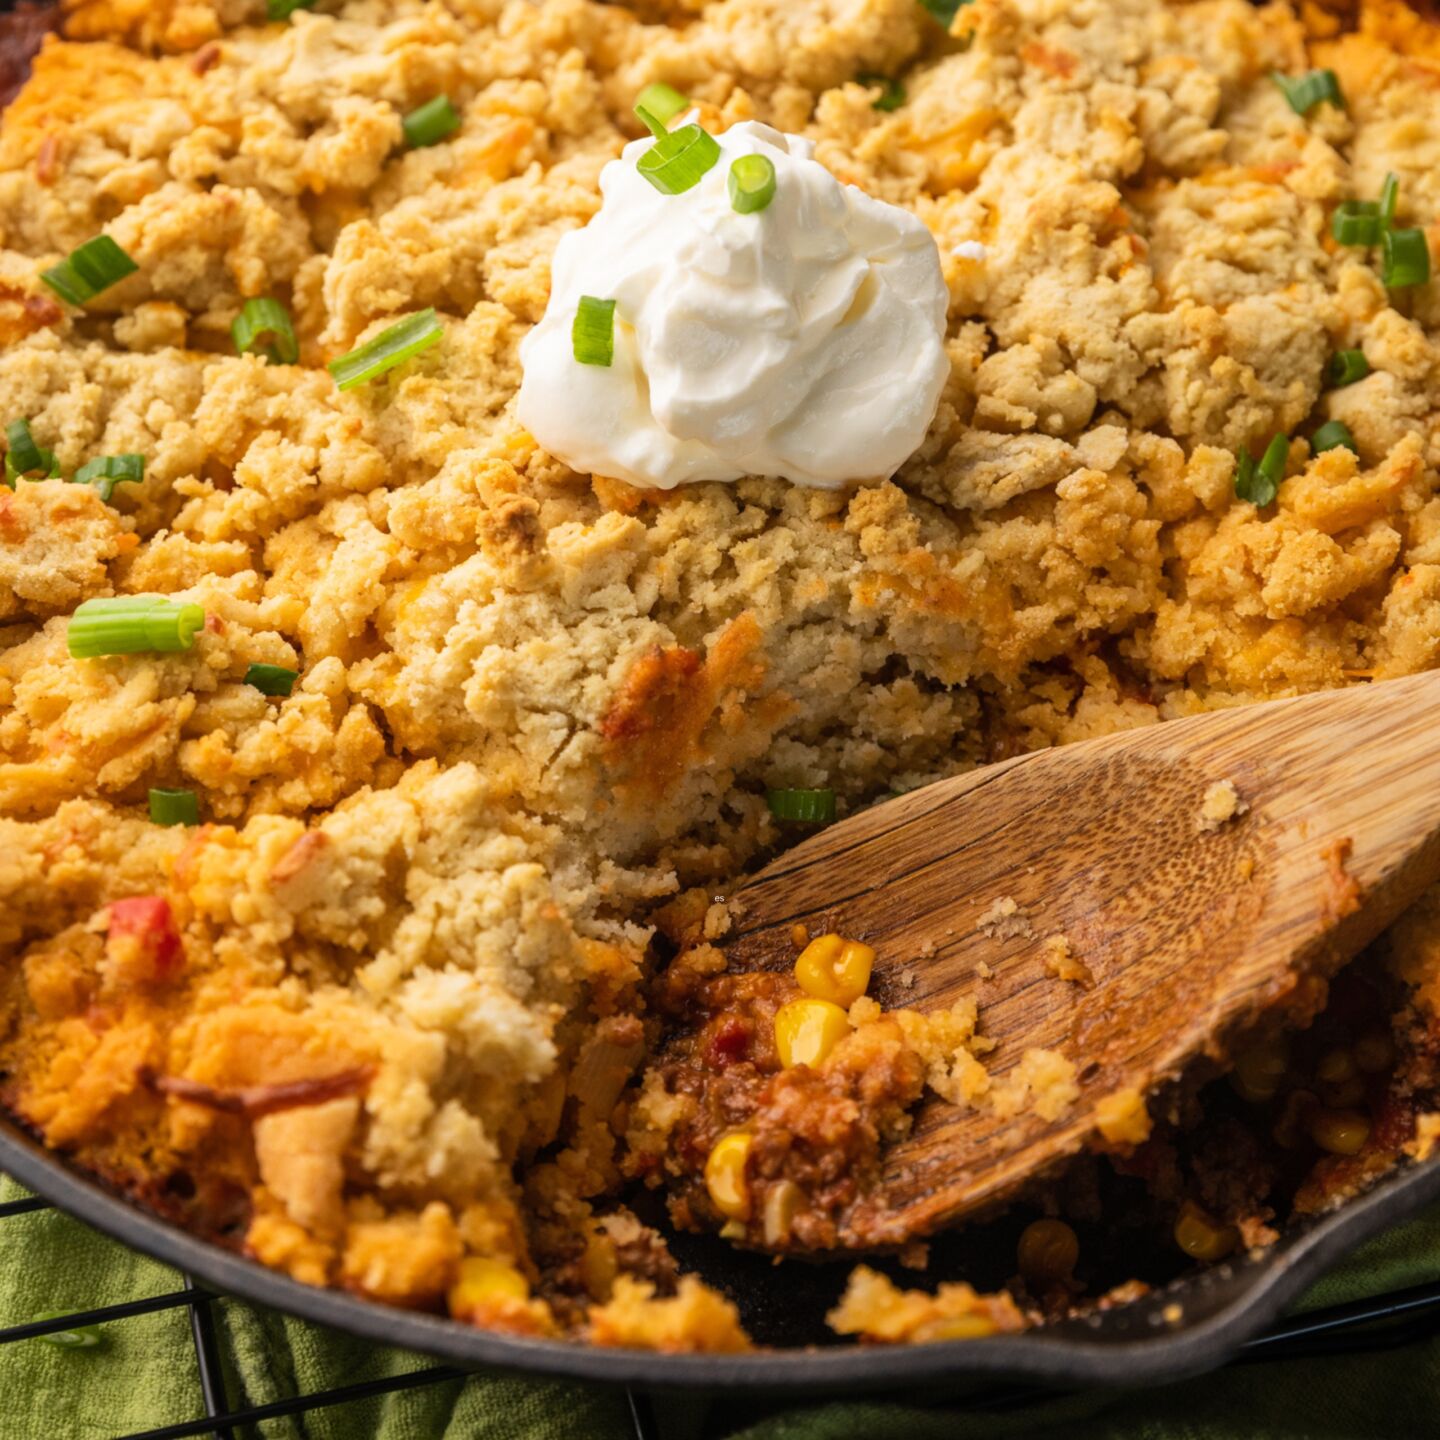 Tamale pie featured